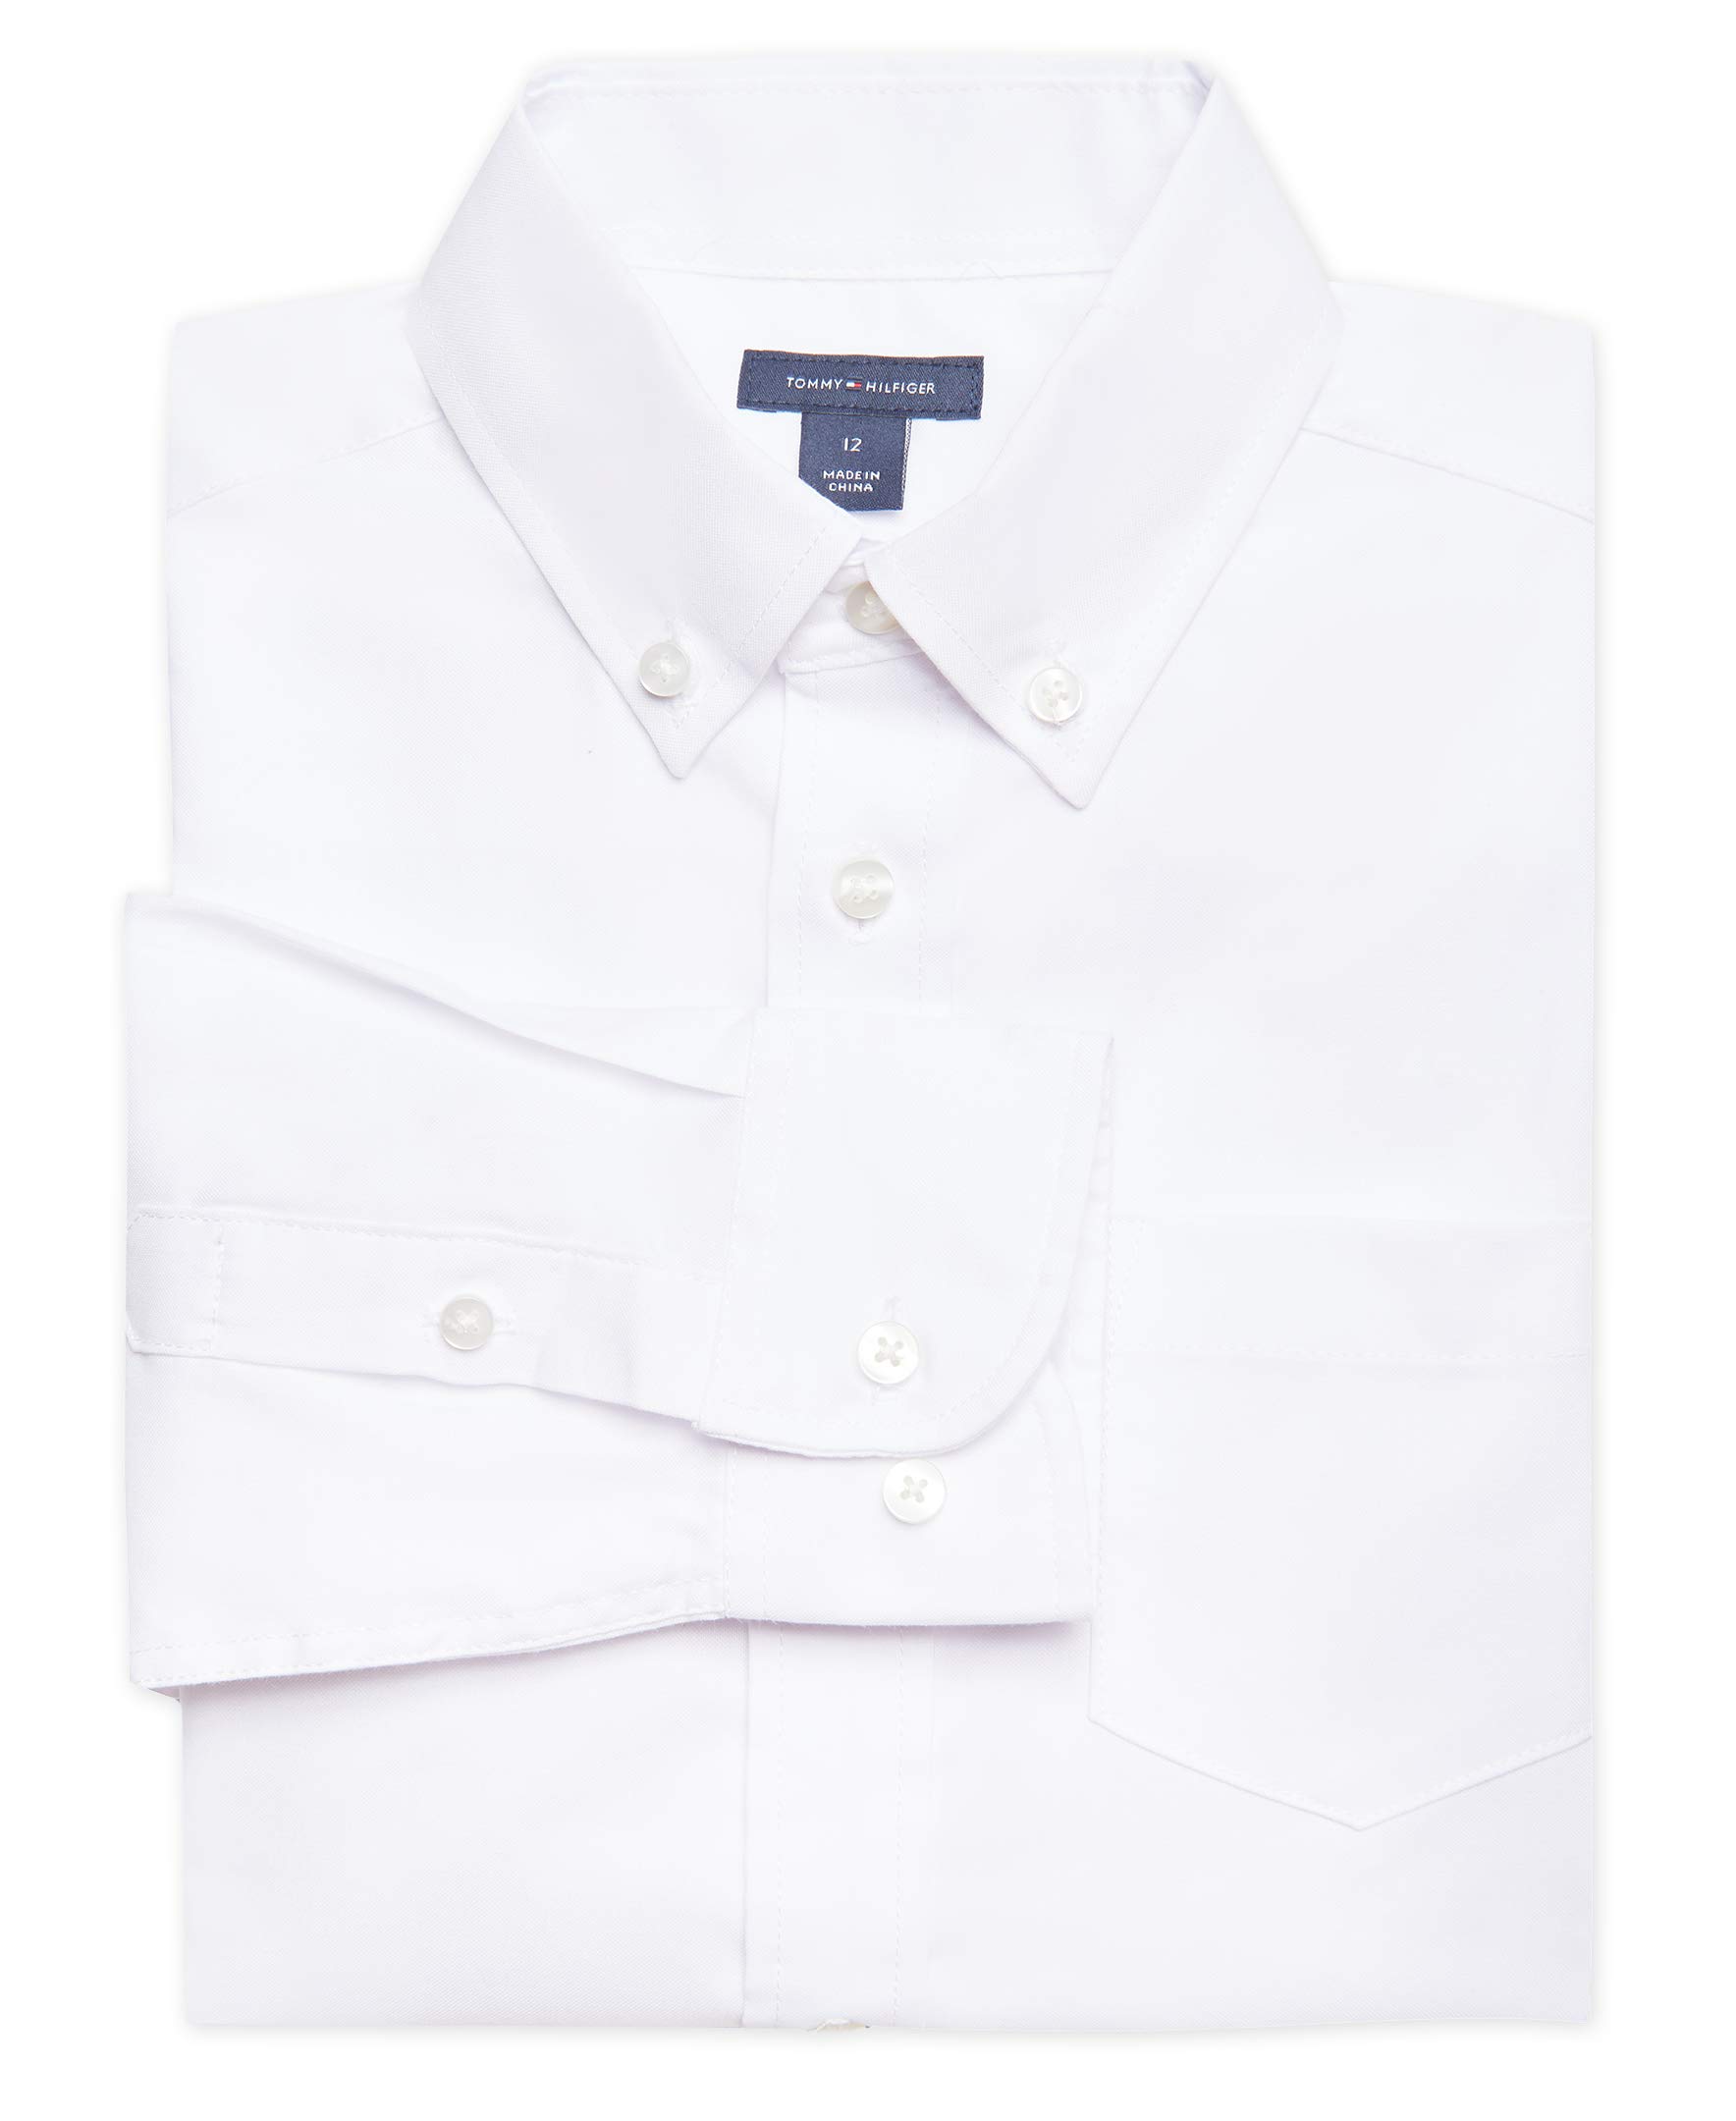 Tommy Hilfiger Boys Oxford Long Sleeve Dress Shirt, Collared Button-Down with Chest Pocket, Regular Fit